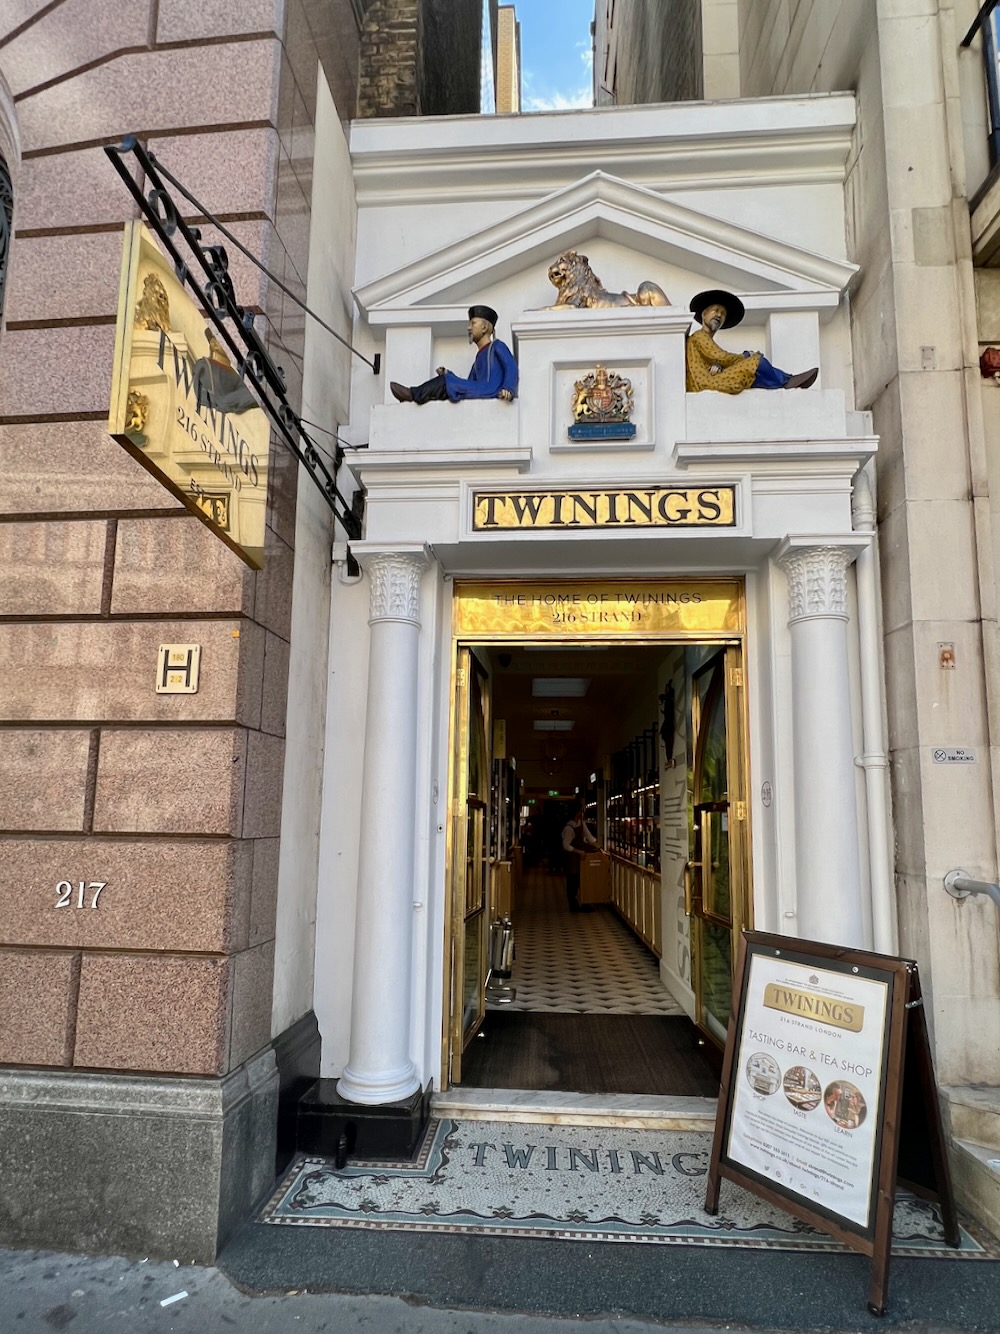 Entrance to Twinnings at 216 The Strand in London. Photo Credit: © Ursula Petula Barzey.